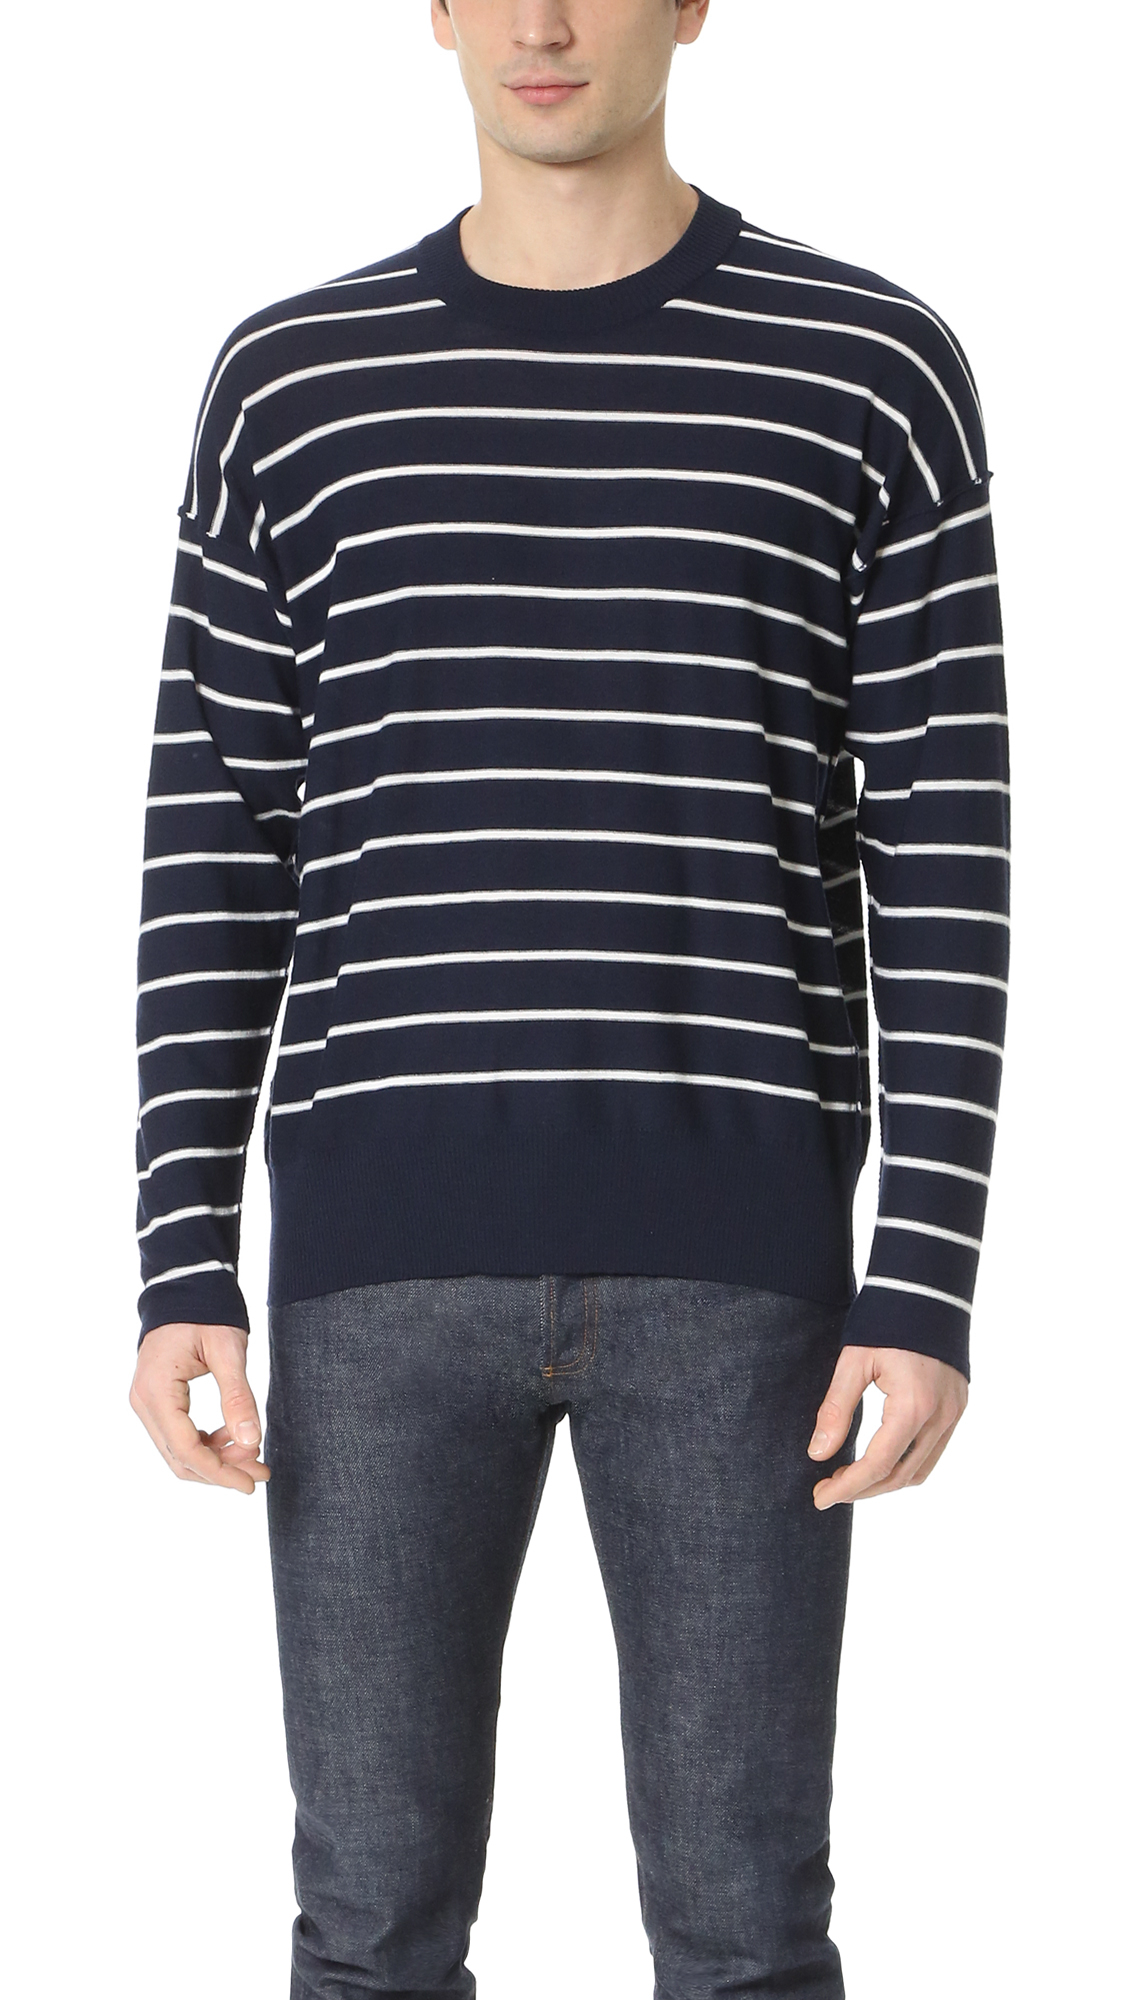 Lyst - AMI Oversized Crew Neck Sweater in Blue for Men